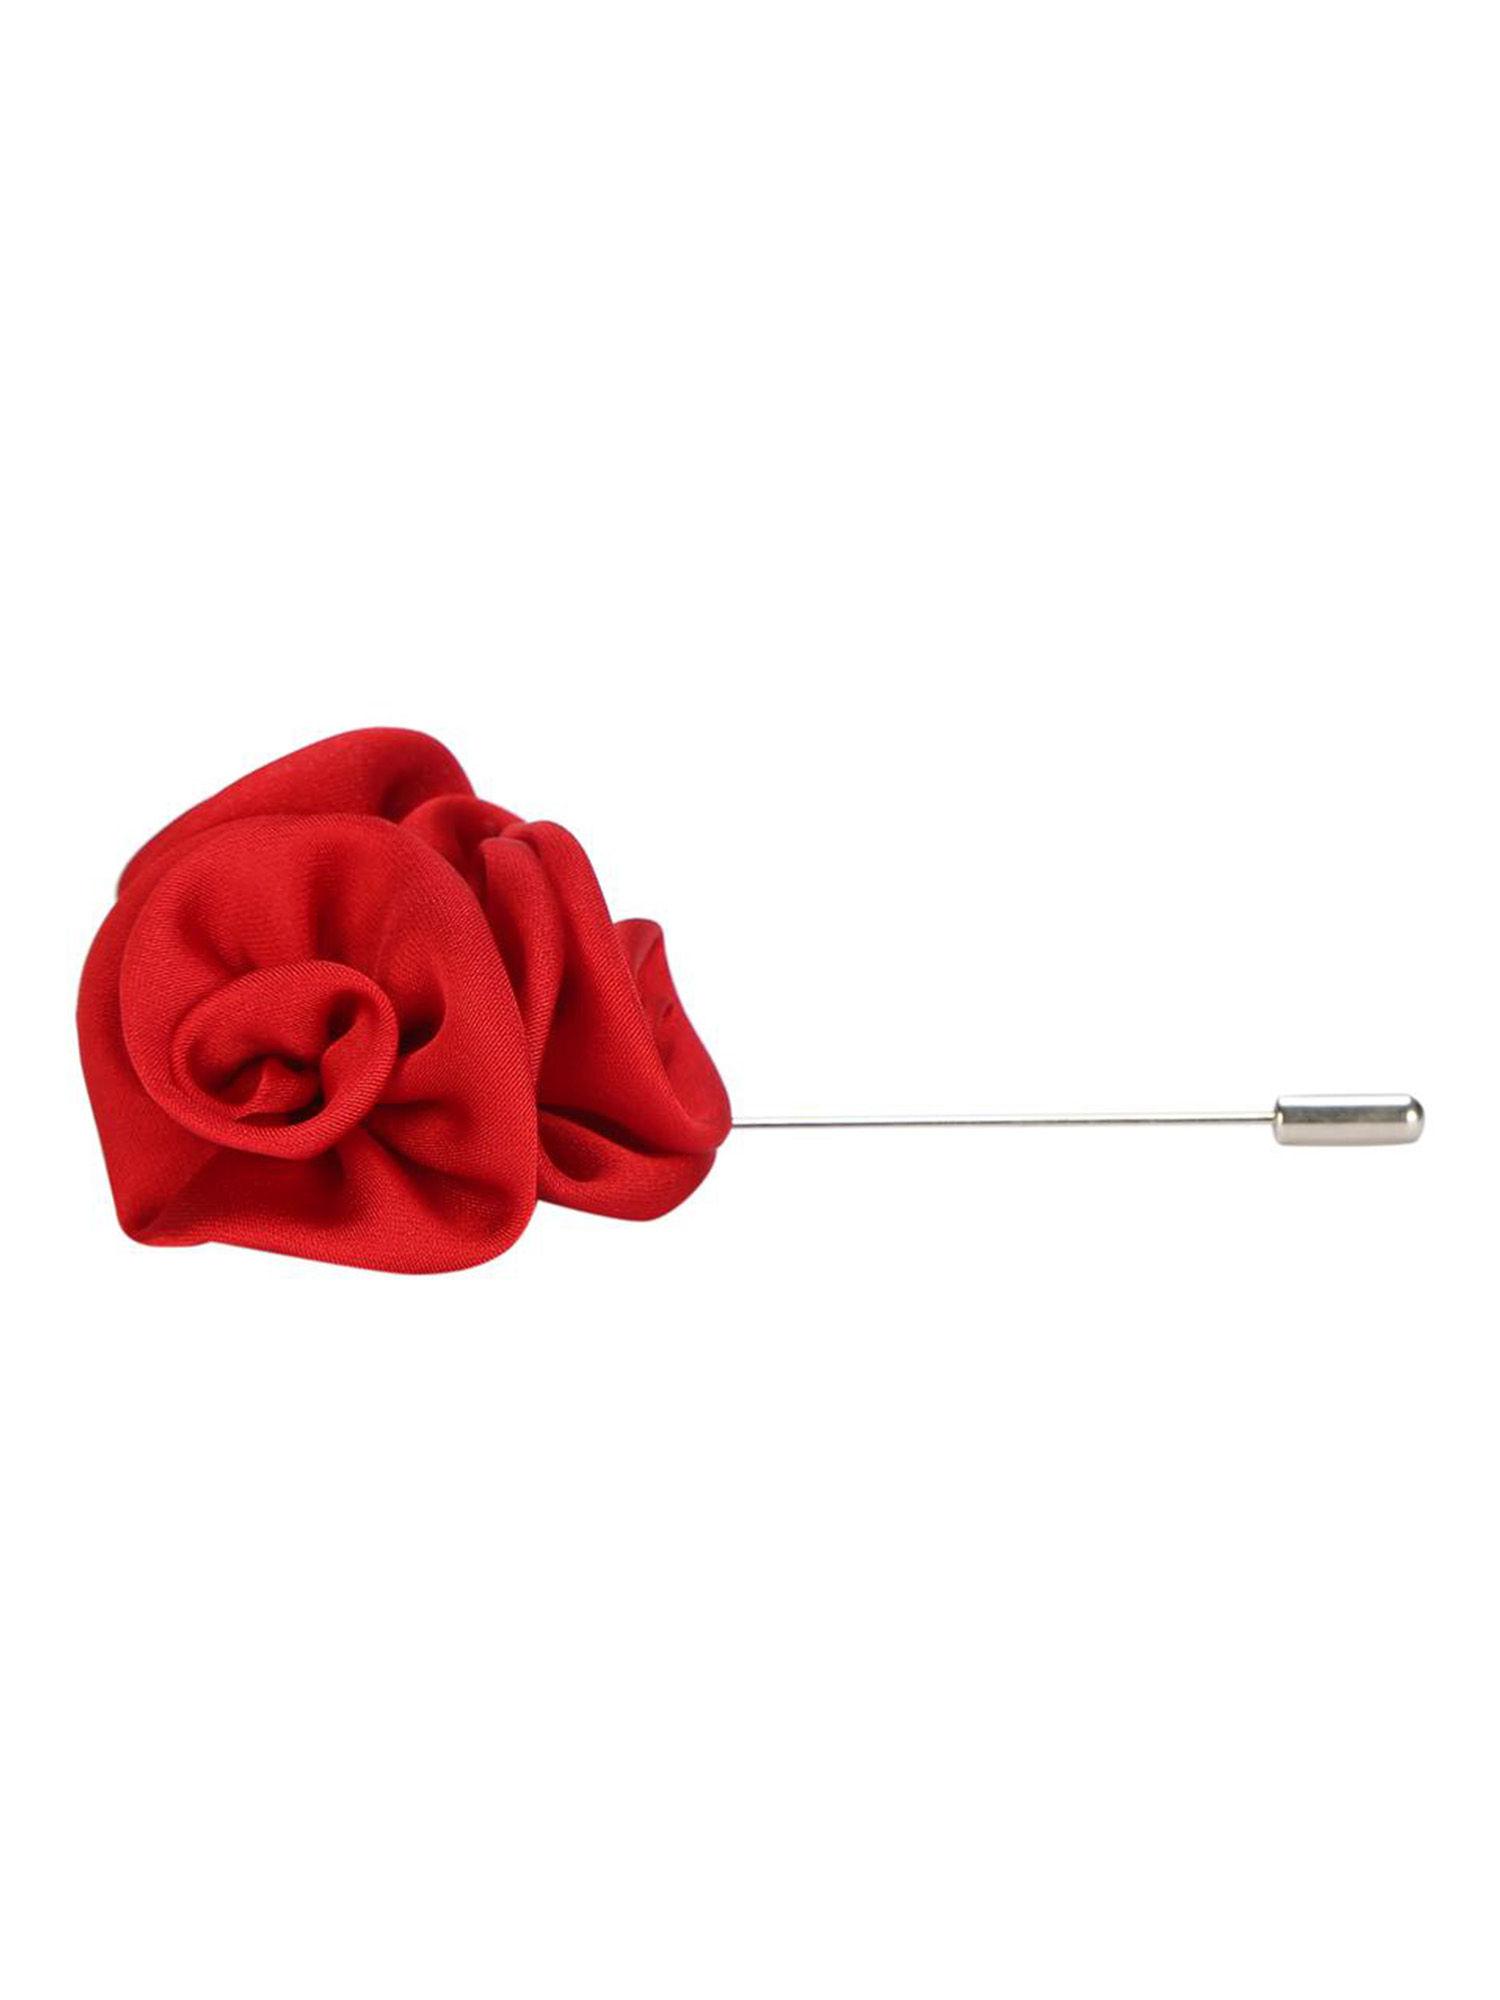 red lapel pin